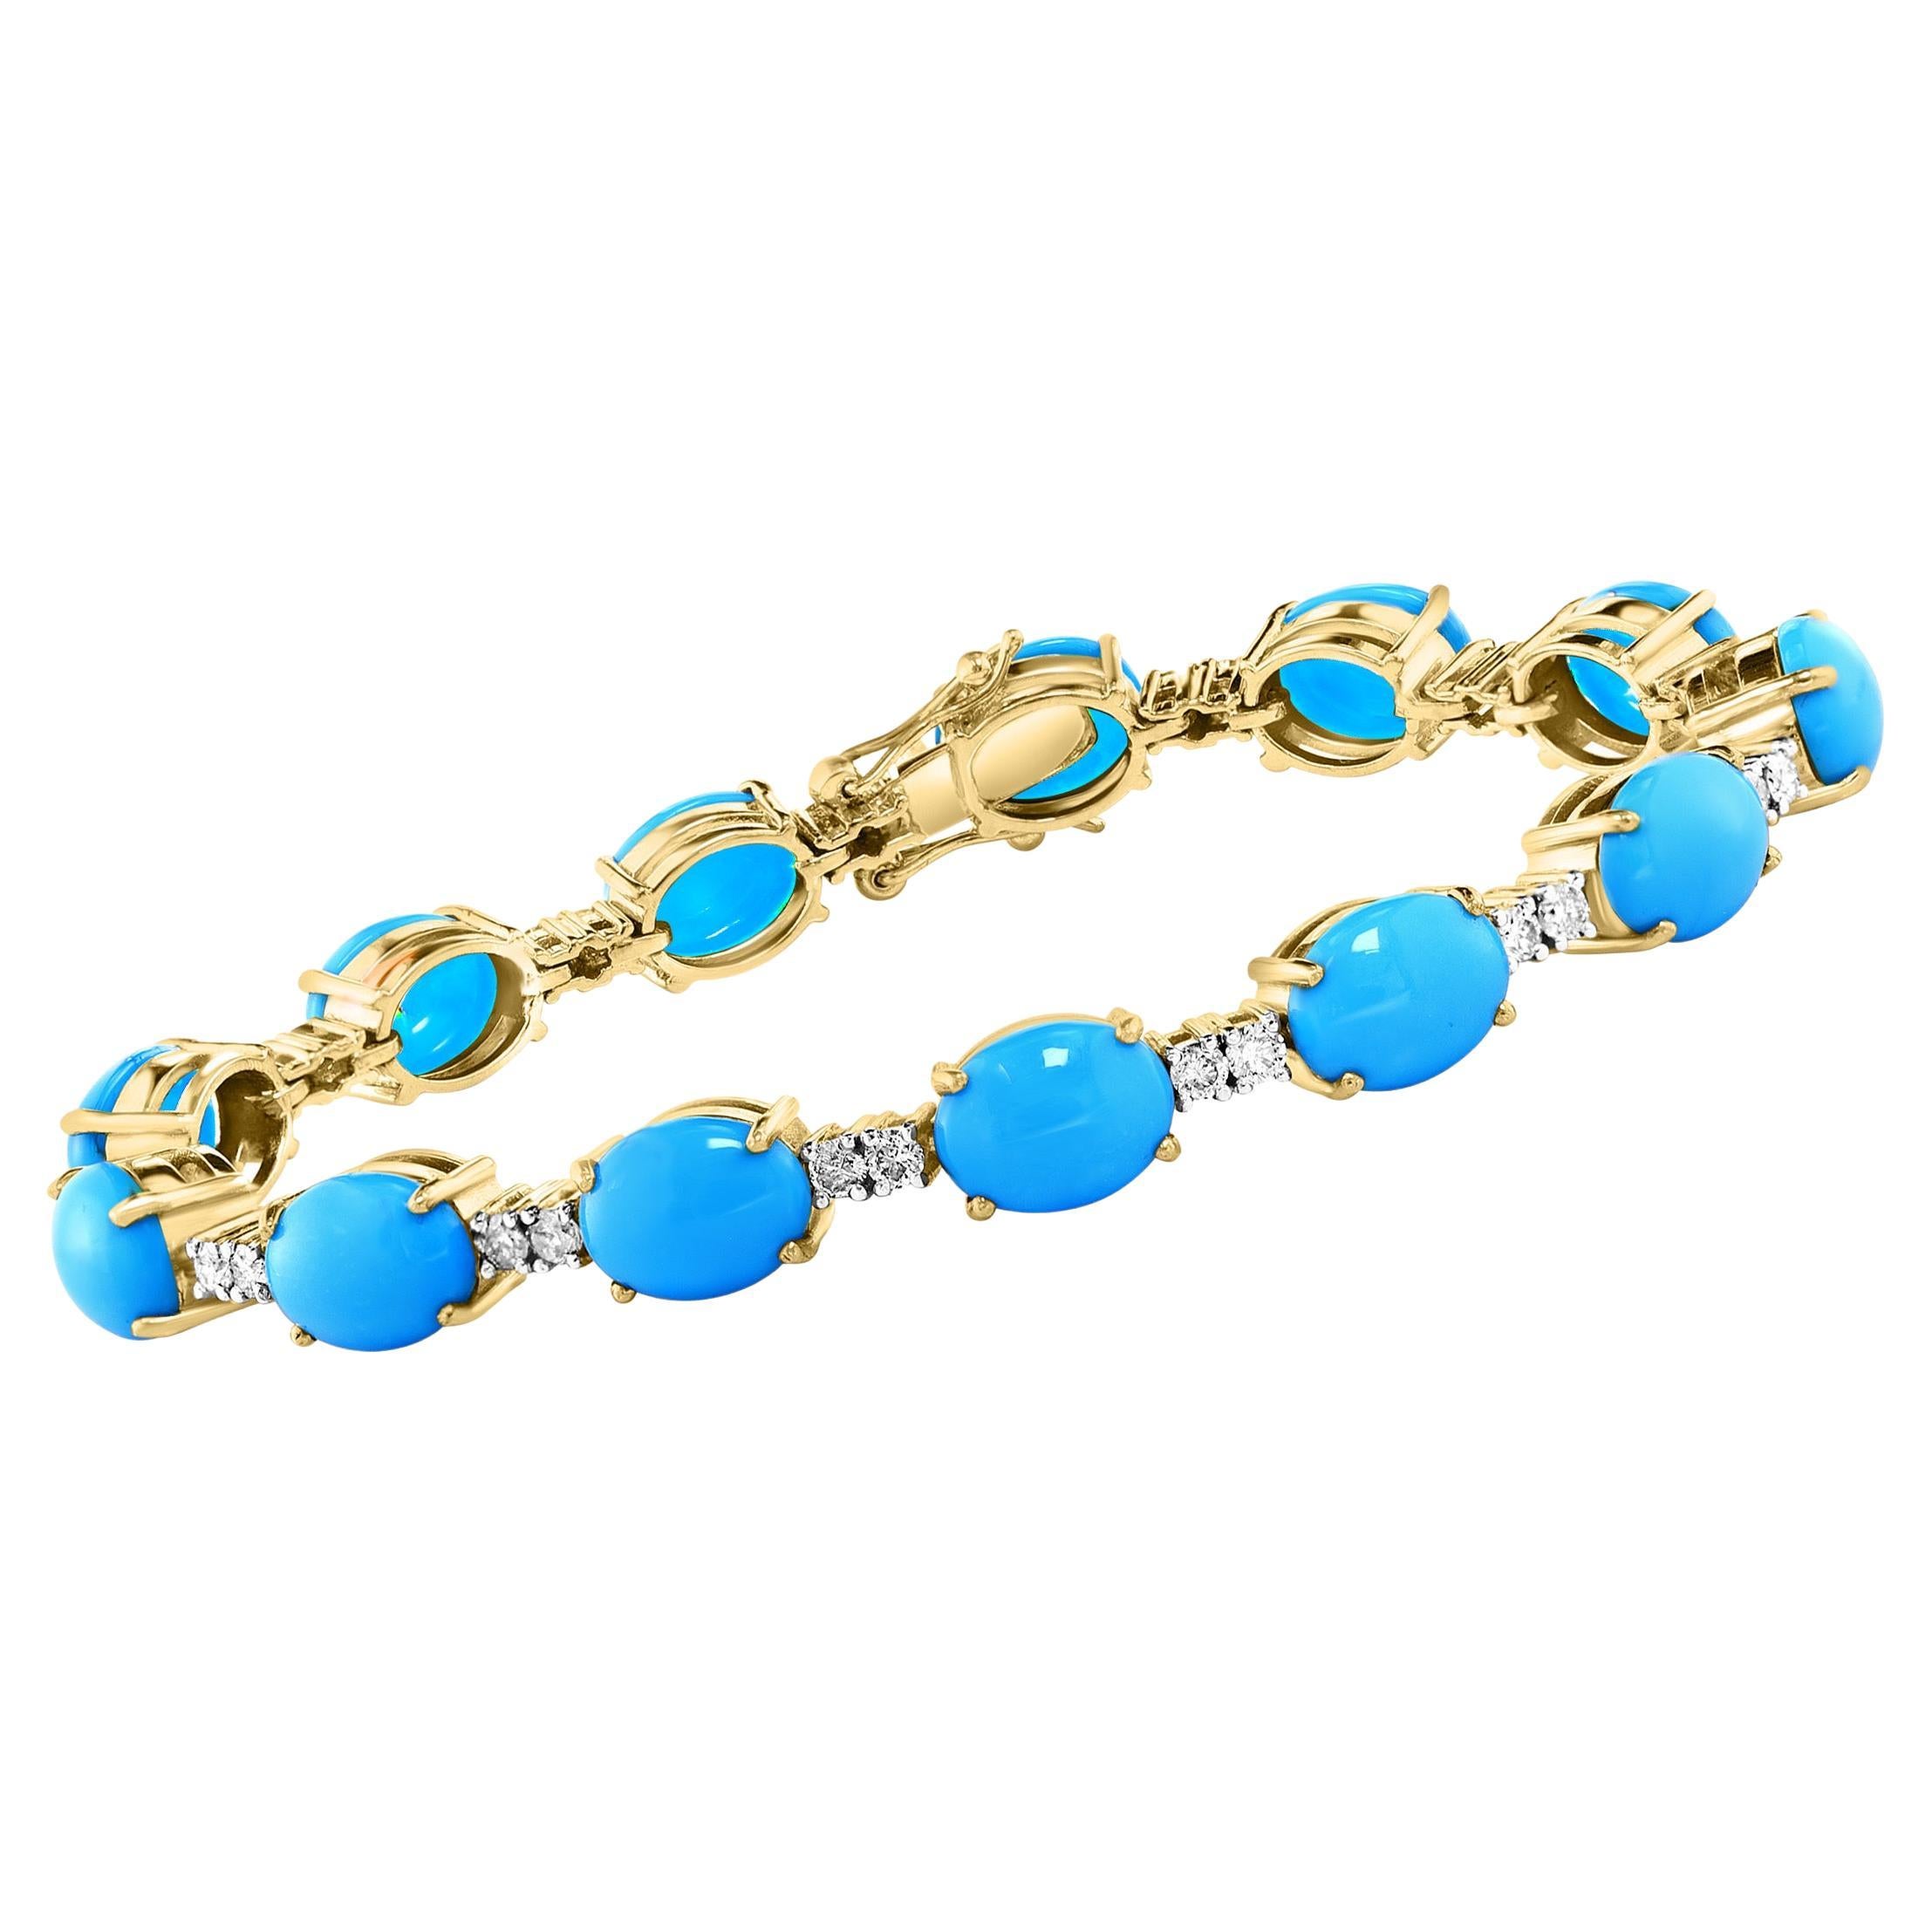 Buy LKBEADS sleeping beauty turquoise,citrine 2-4mm, 46 Pieces round shape  smooth cut gemstone beads 7 inch stacking bracelet with 925 sterling  silver- gold plated lock clasp bracelet- link chian bracelet for unisex